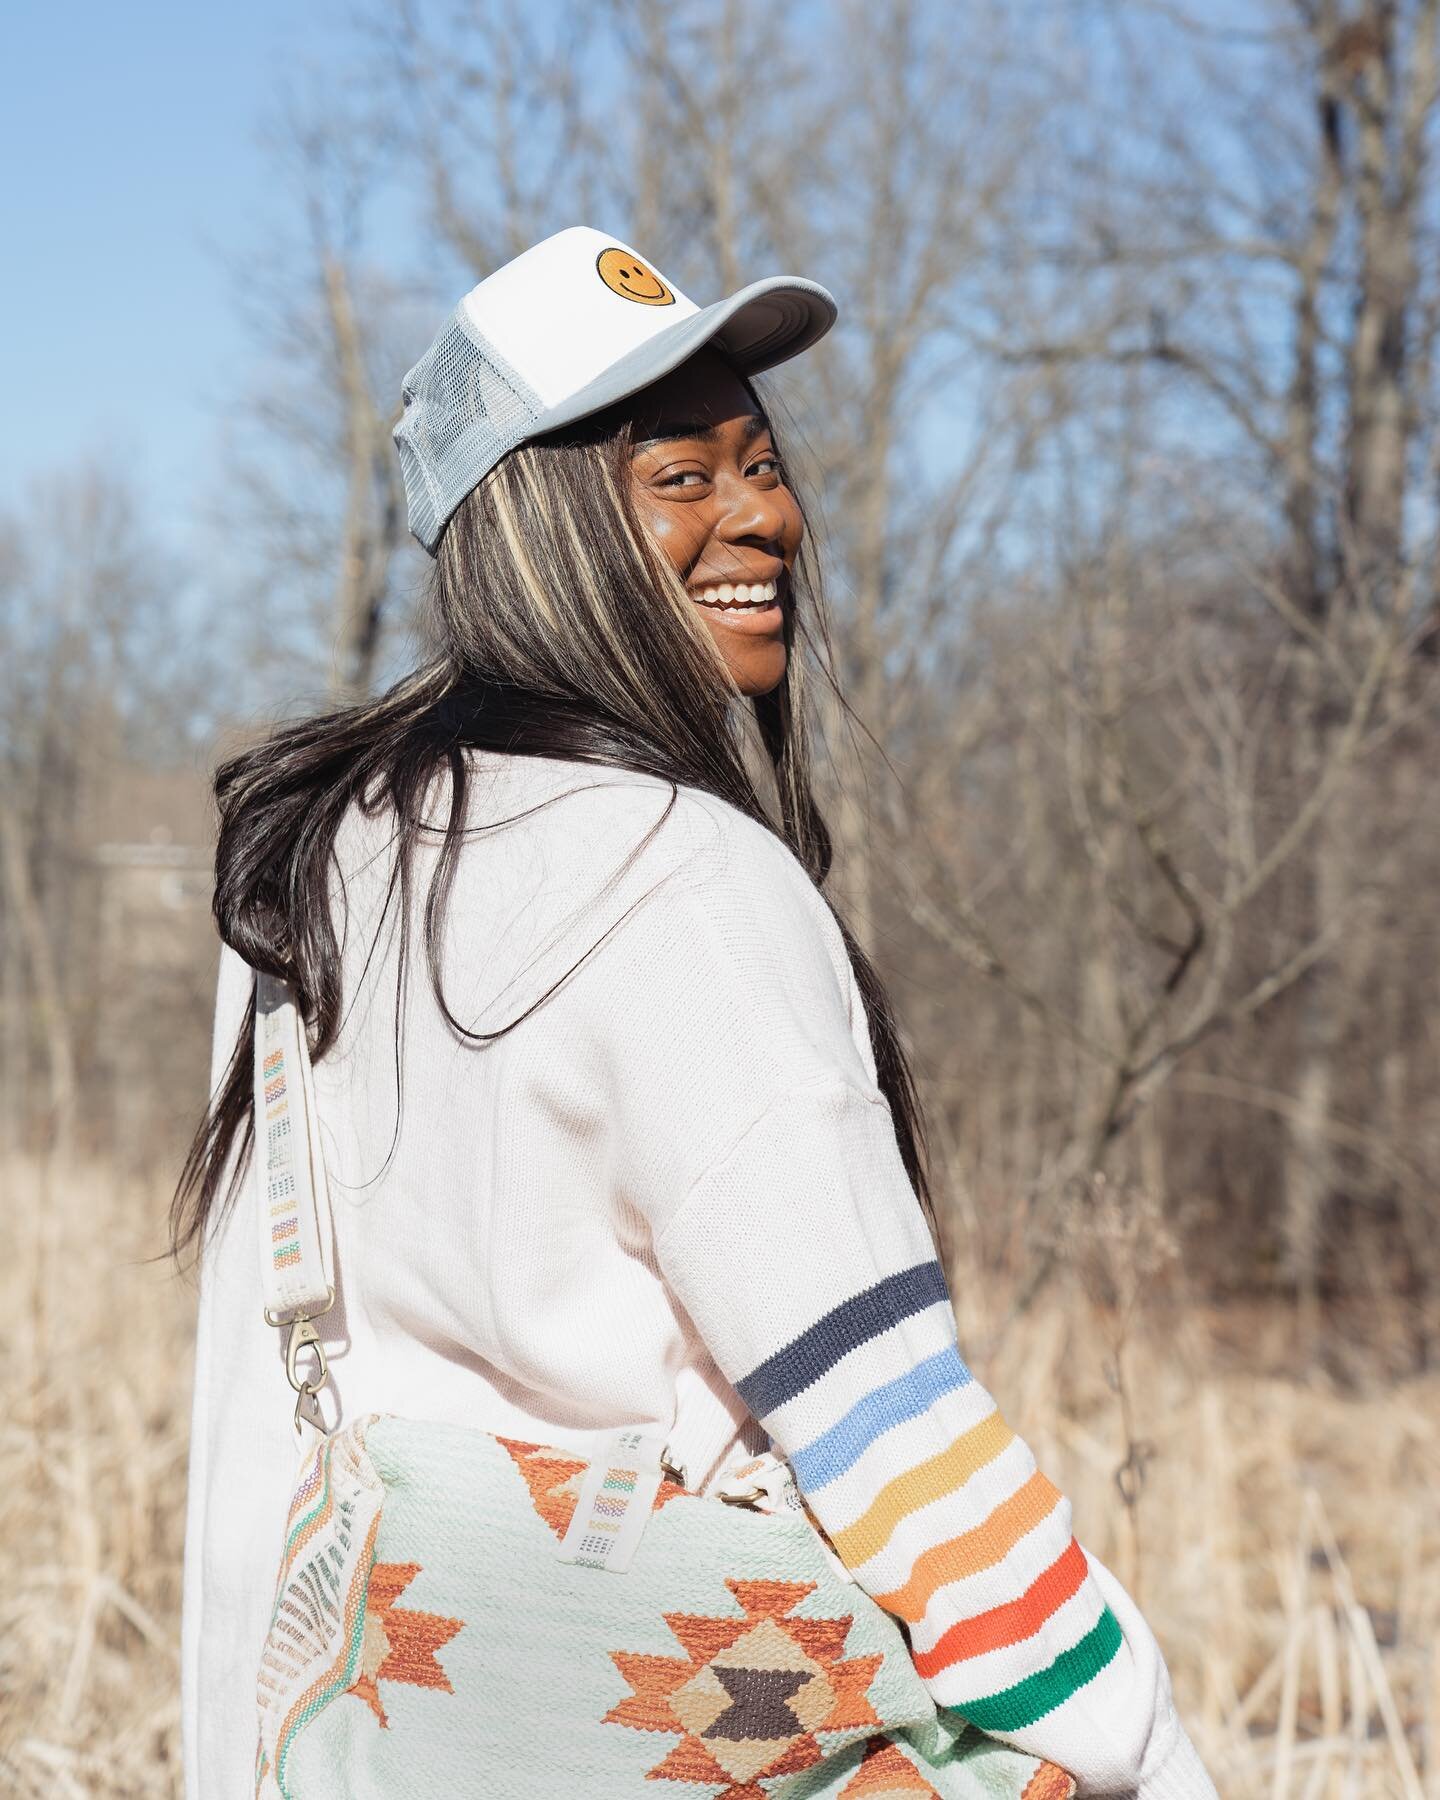 Happy you&rsquo;re mid-way through the week? Time to celebrate with these uplifting items from @shopnortherncountrychic ! This shoot was so much fun. @thewaxpoetic and I laughed a lot. She completely lights up these cute spring items and makes me wan